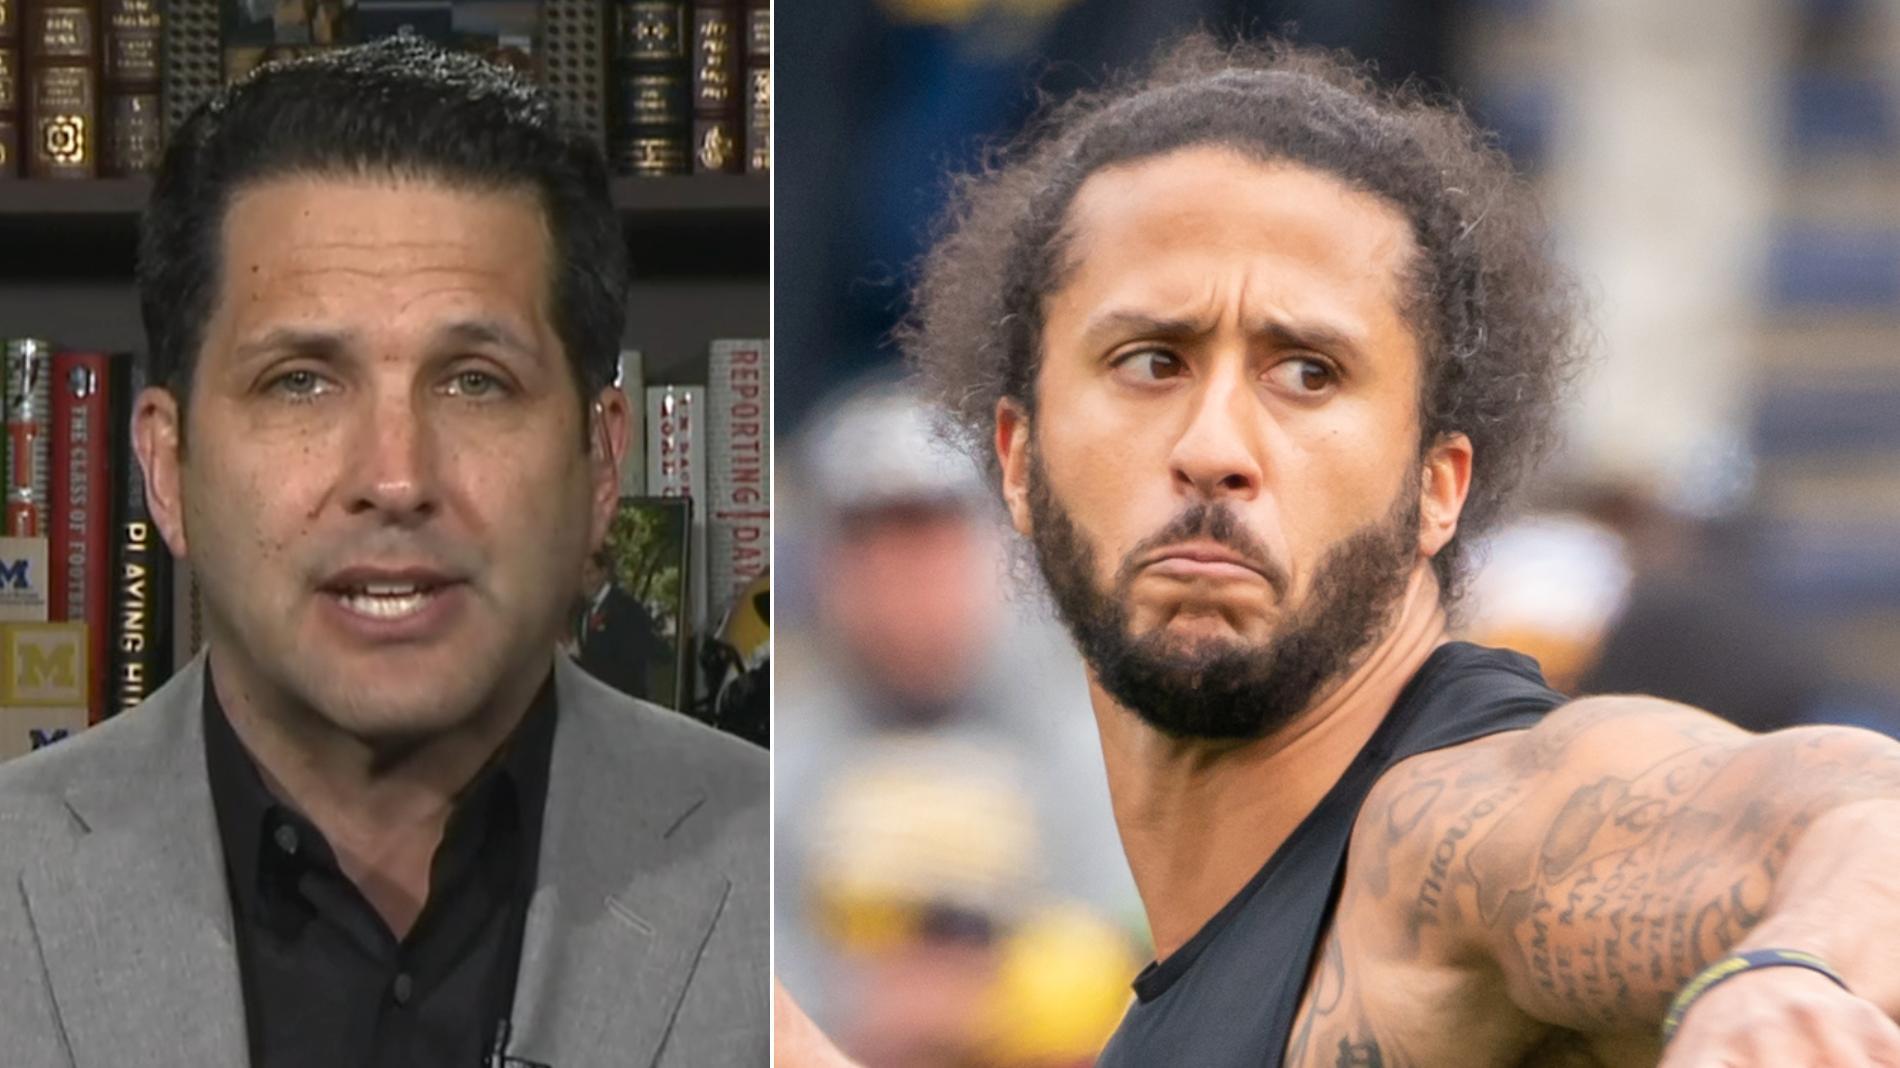 Schefter: Colin Kaepernick to work out with Las Vegas Raiders